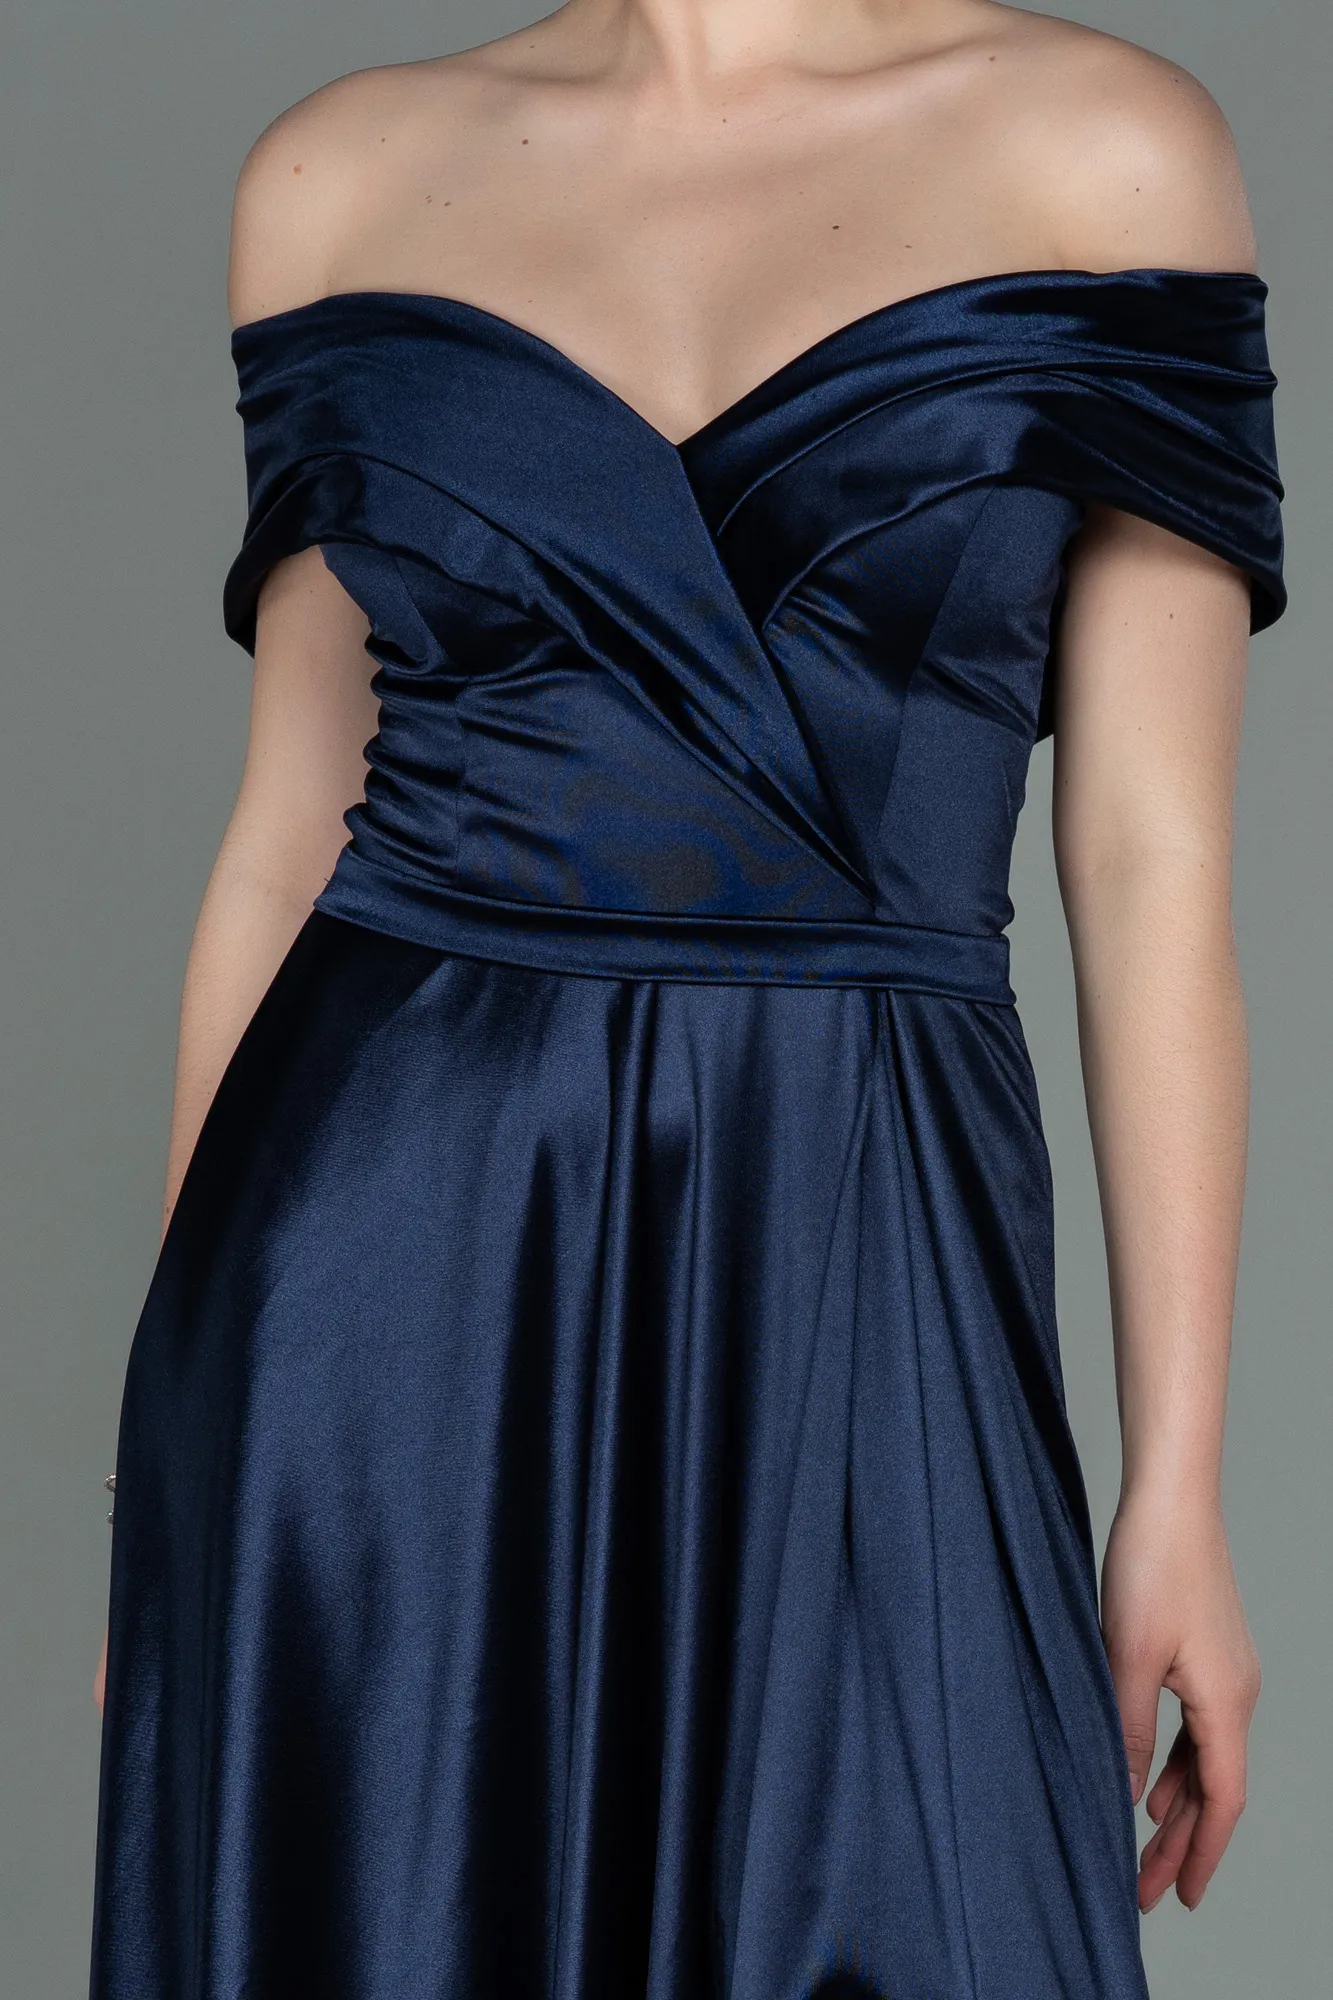 Navy Blue-Long Prom Gown ABU3157